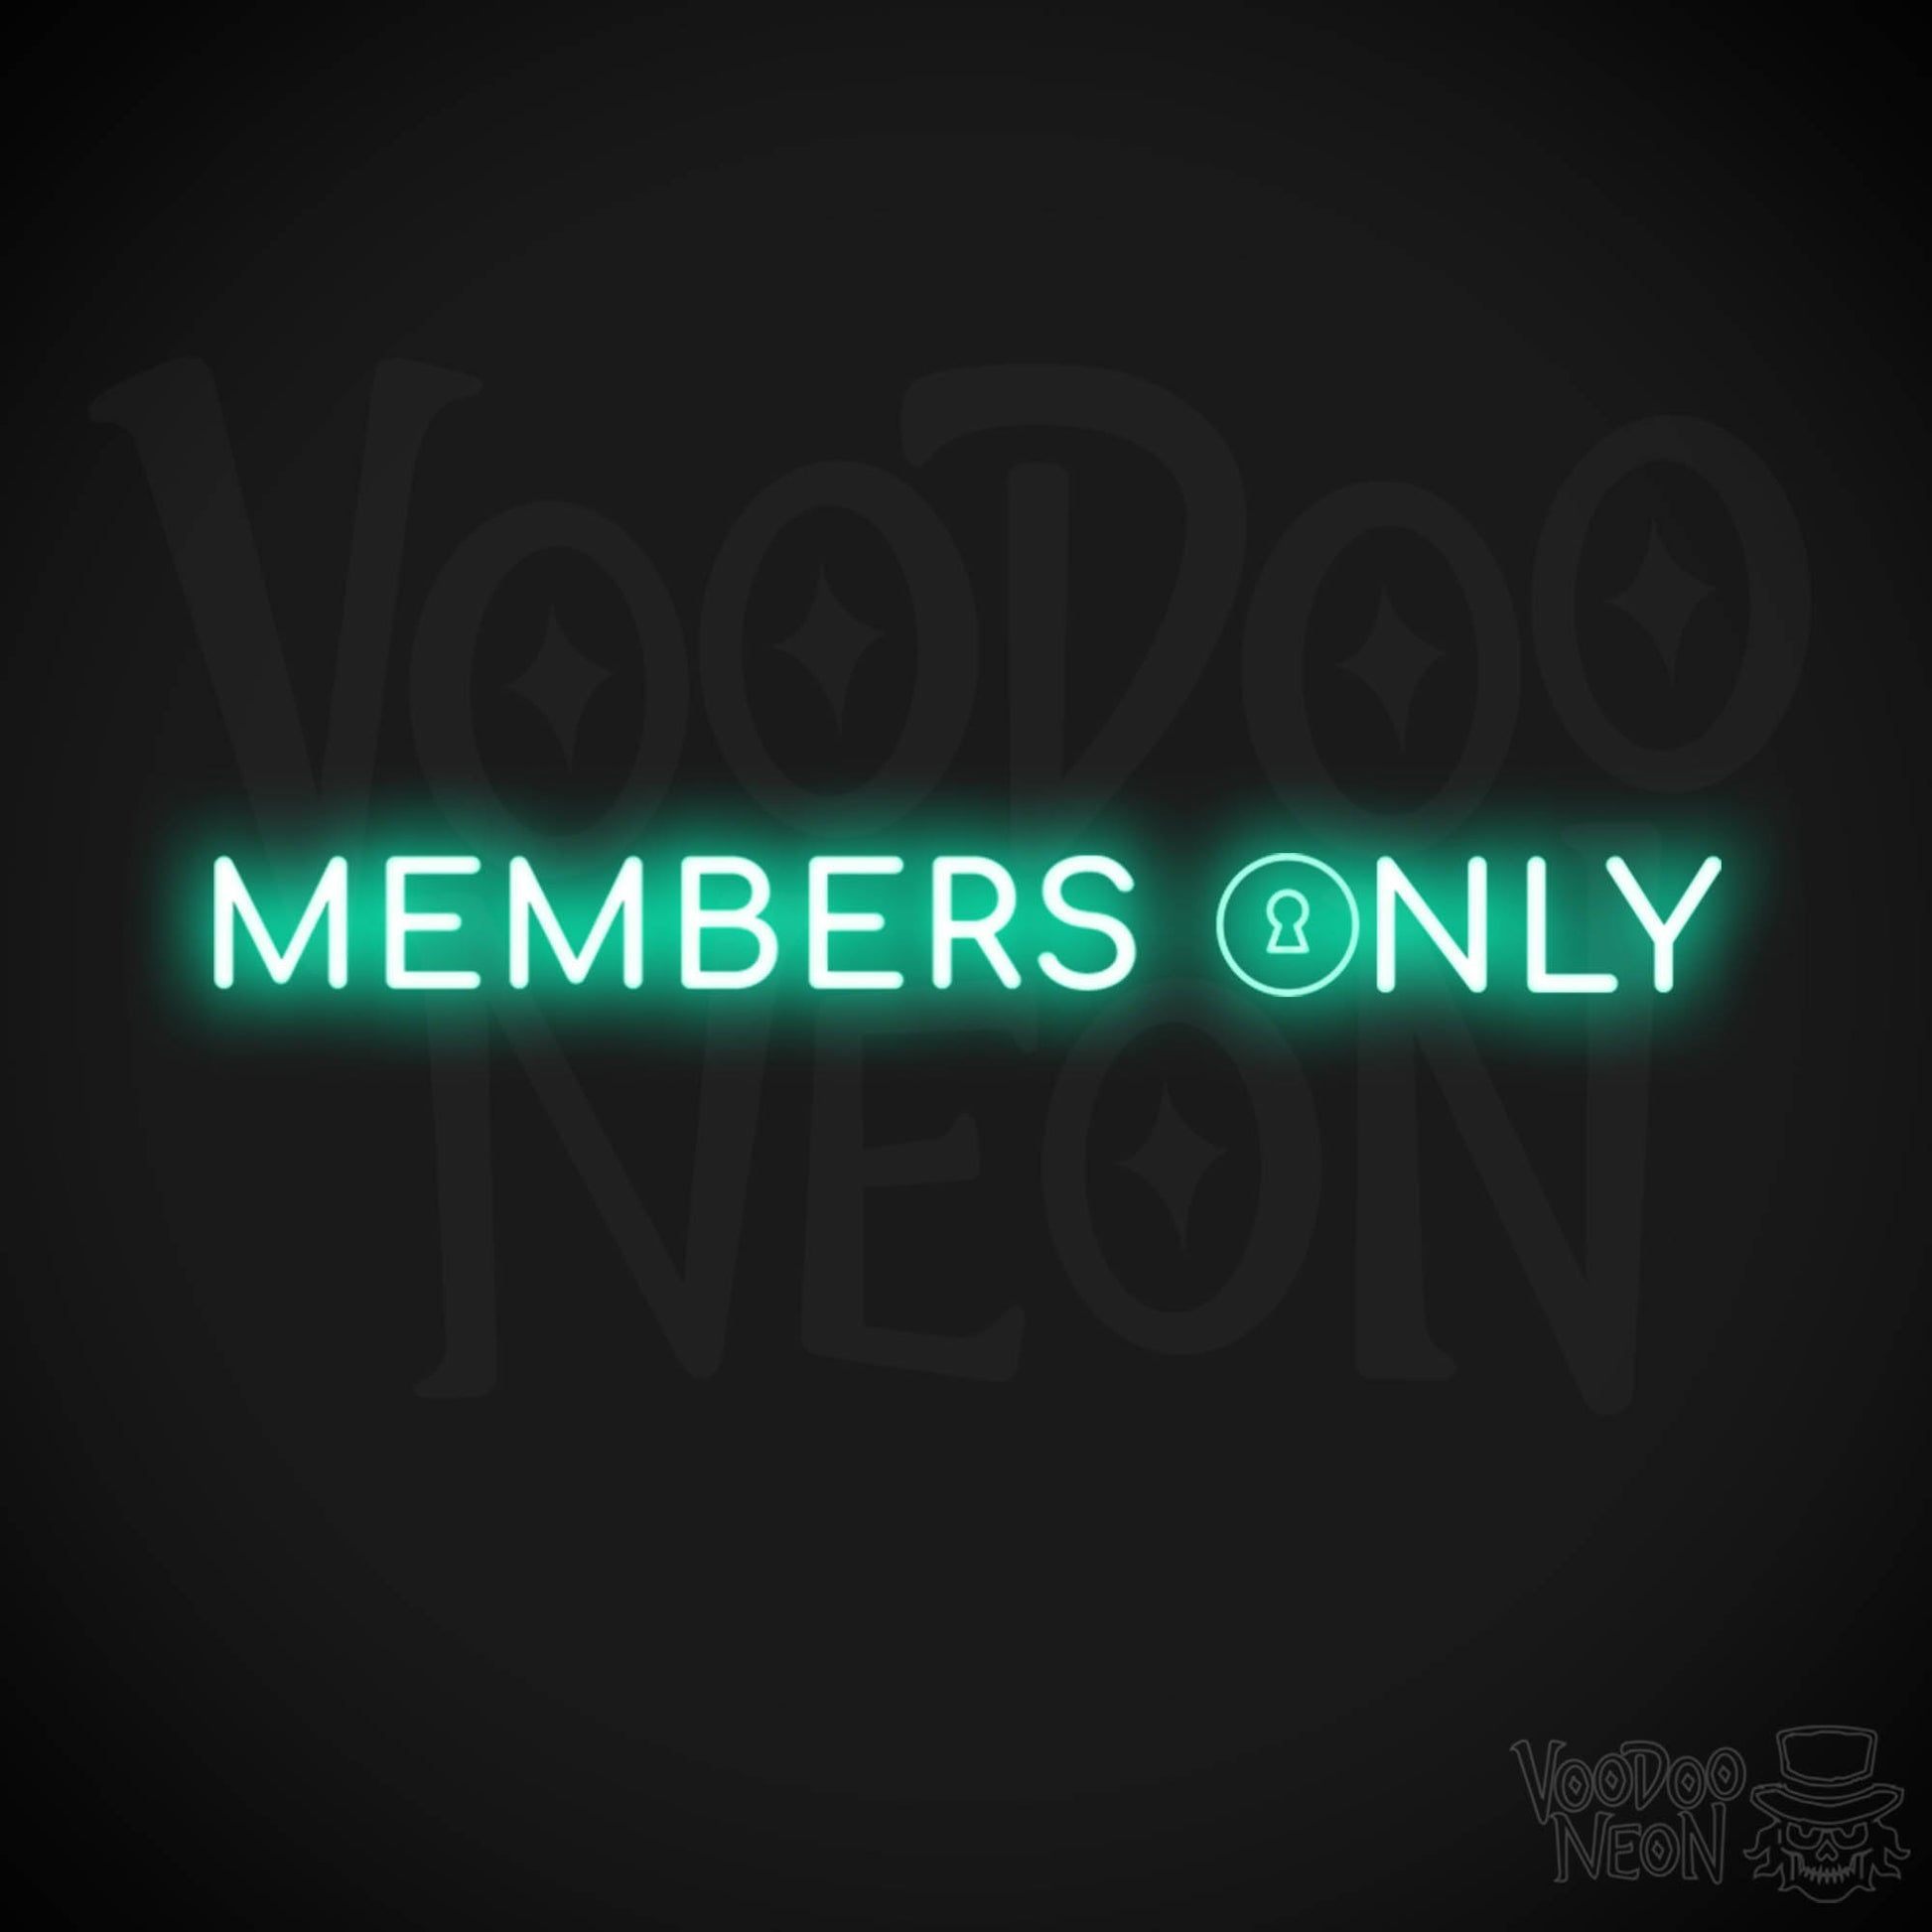 Members Only Neon Sign - Neon Members Only Sign - Color Light Green